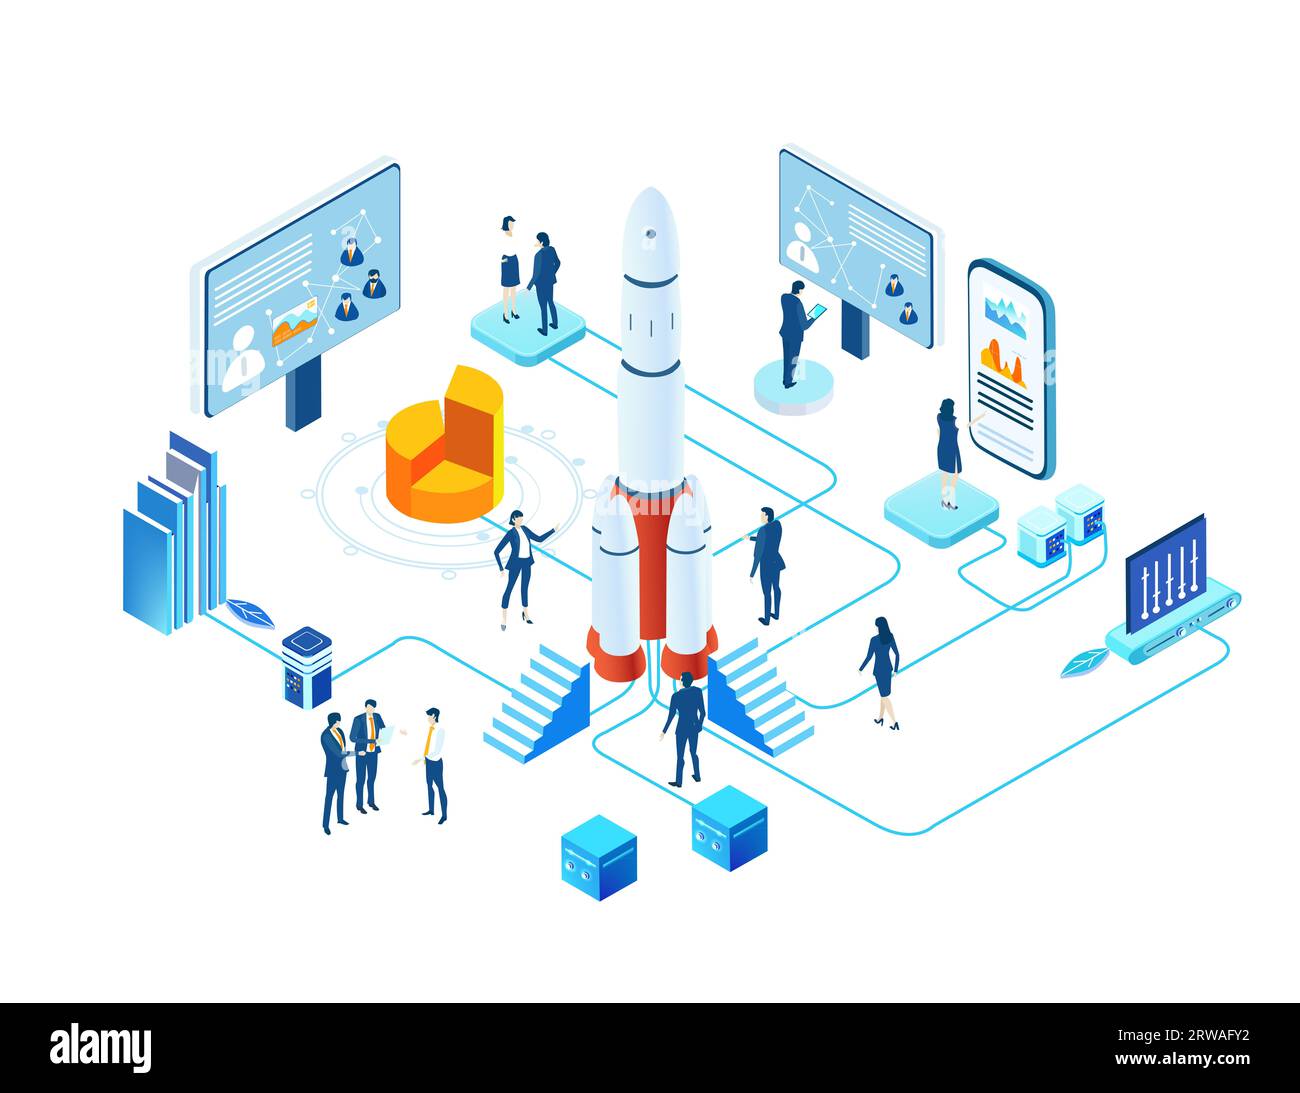 Isometric environment infographic. Business people work together next to rocket. Rocket is ready to start,  space technology, start up concept Stock Photo